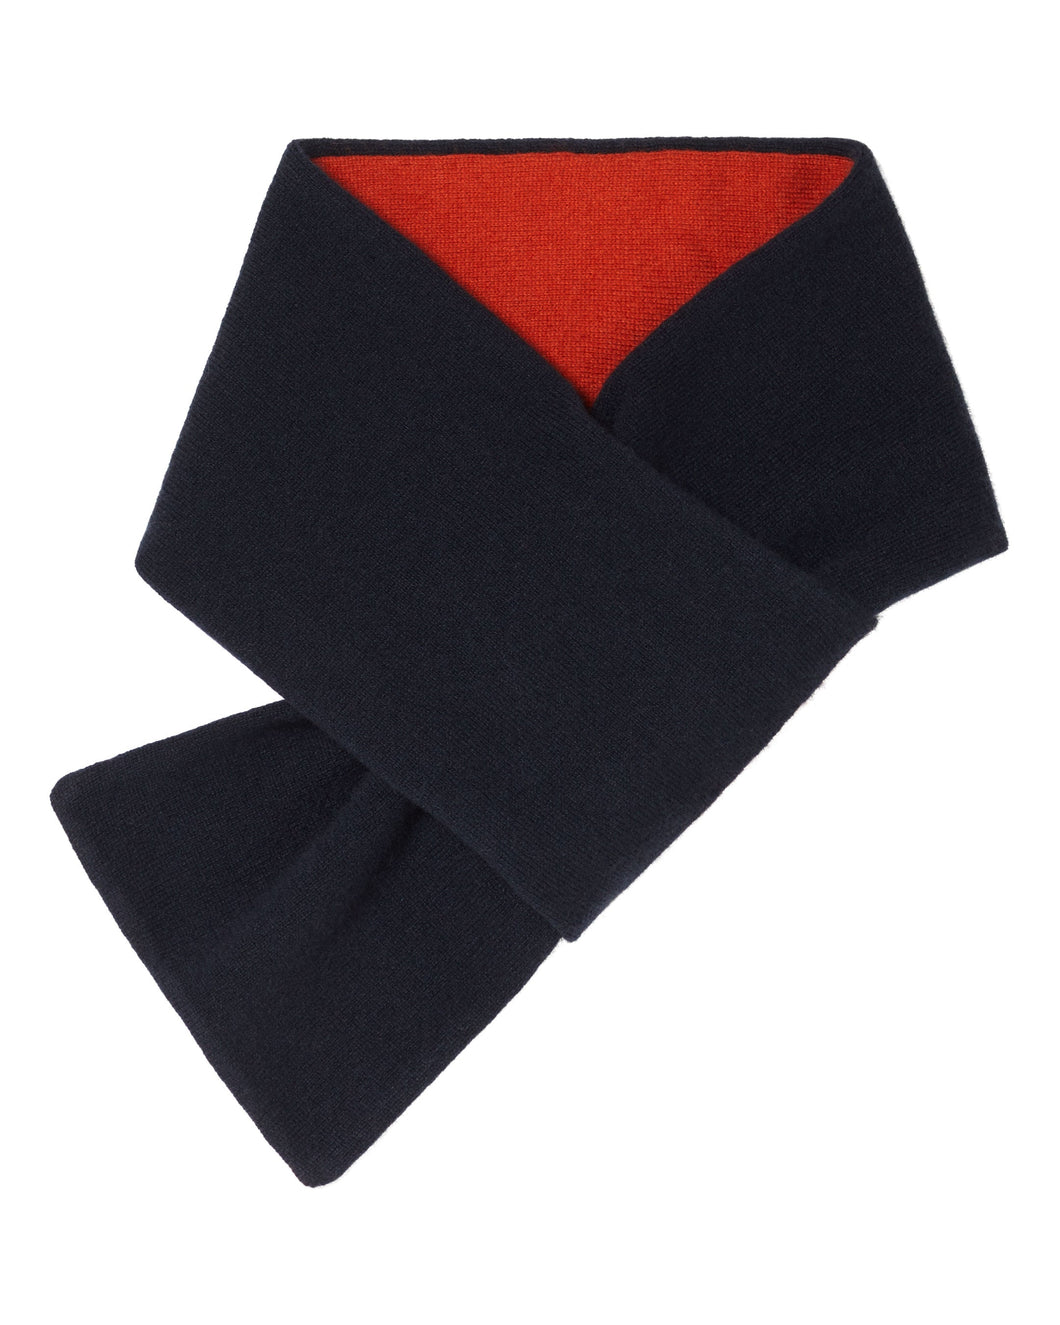 N.Peal Men's Two Tone Small Cashmere Scarf Navy Blue + Dark Amber Orange